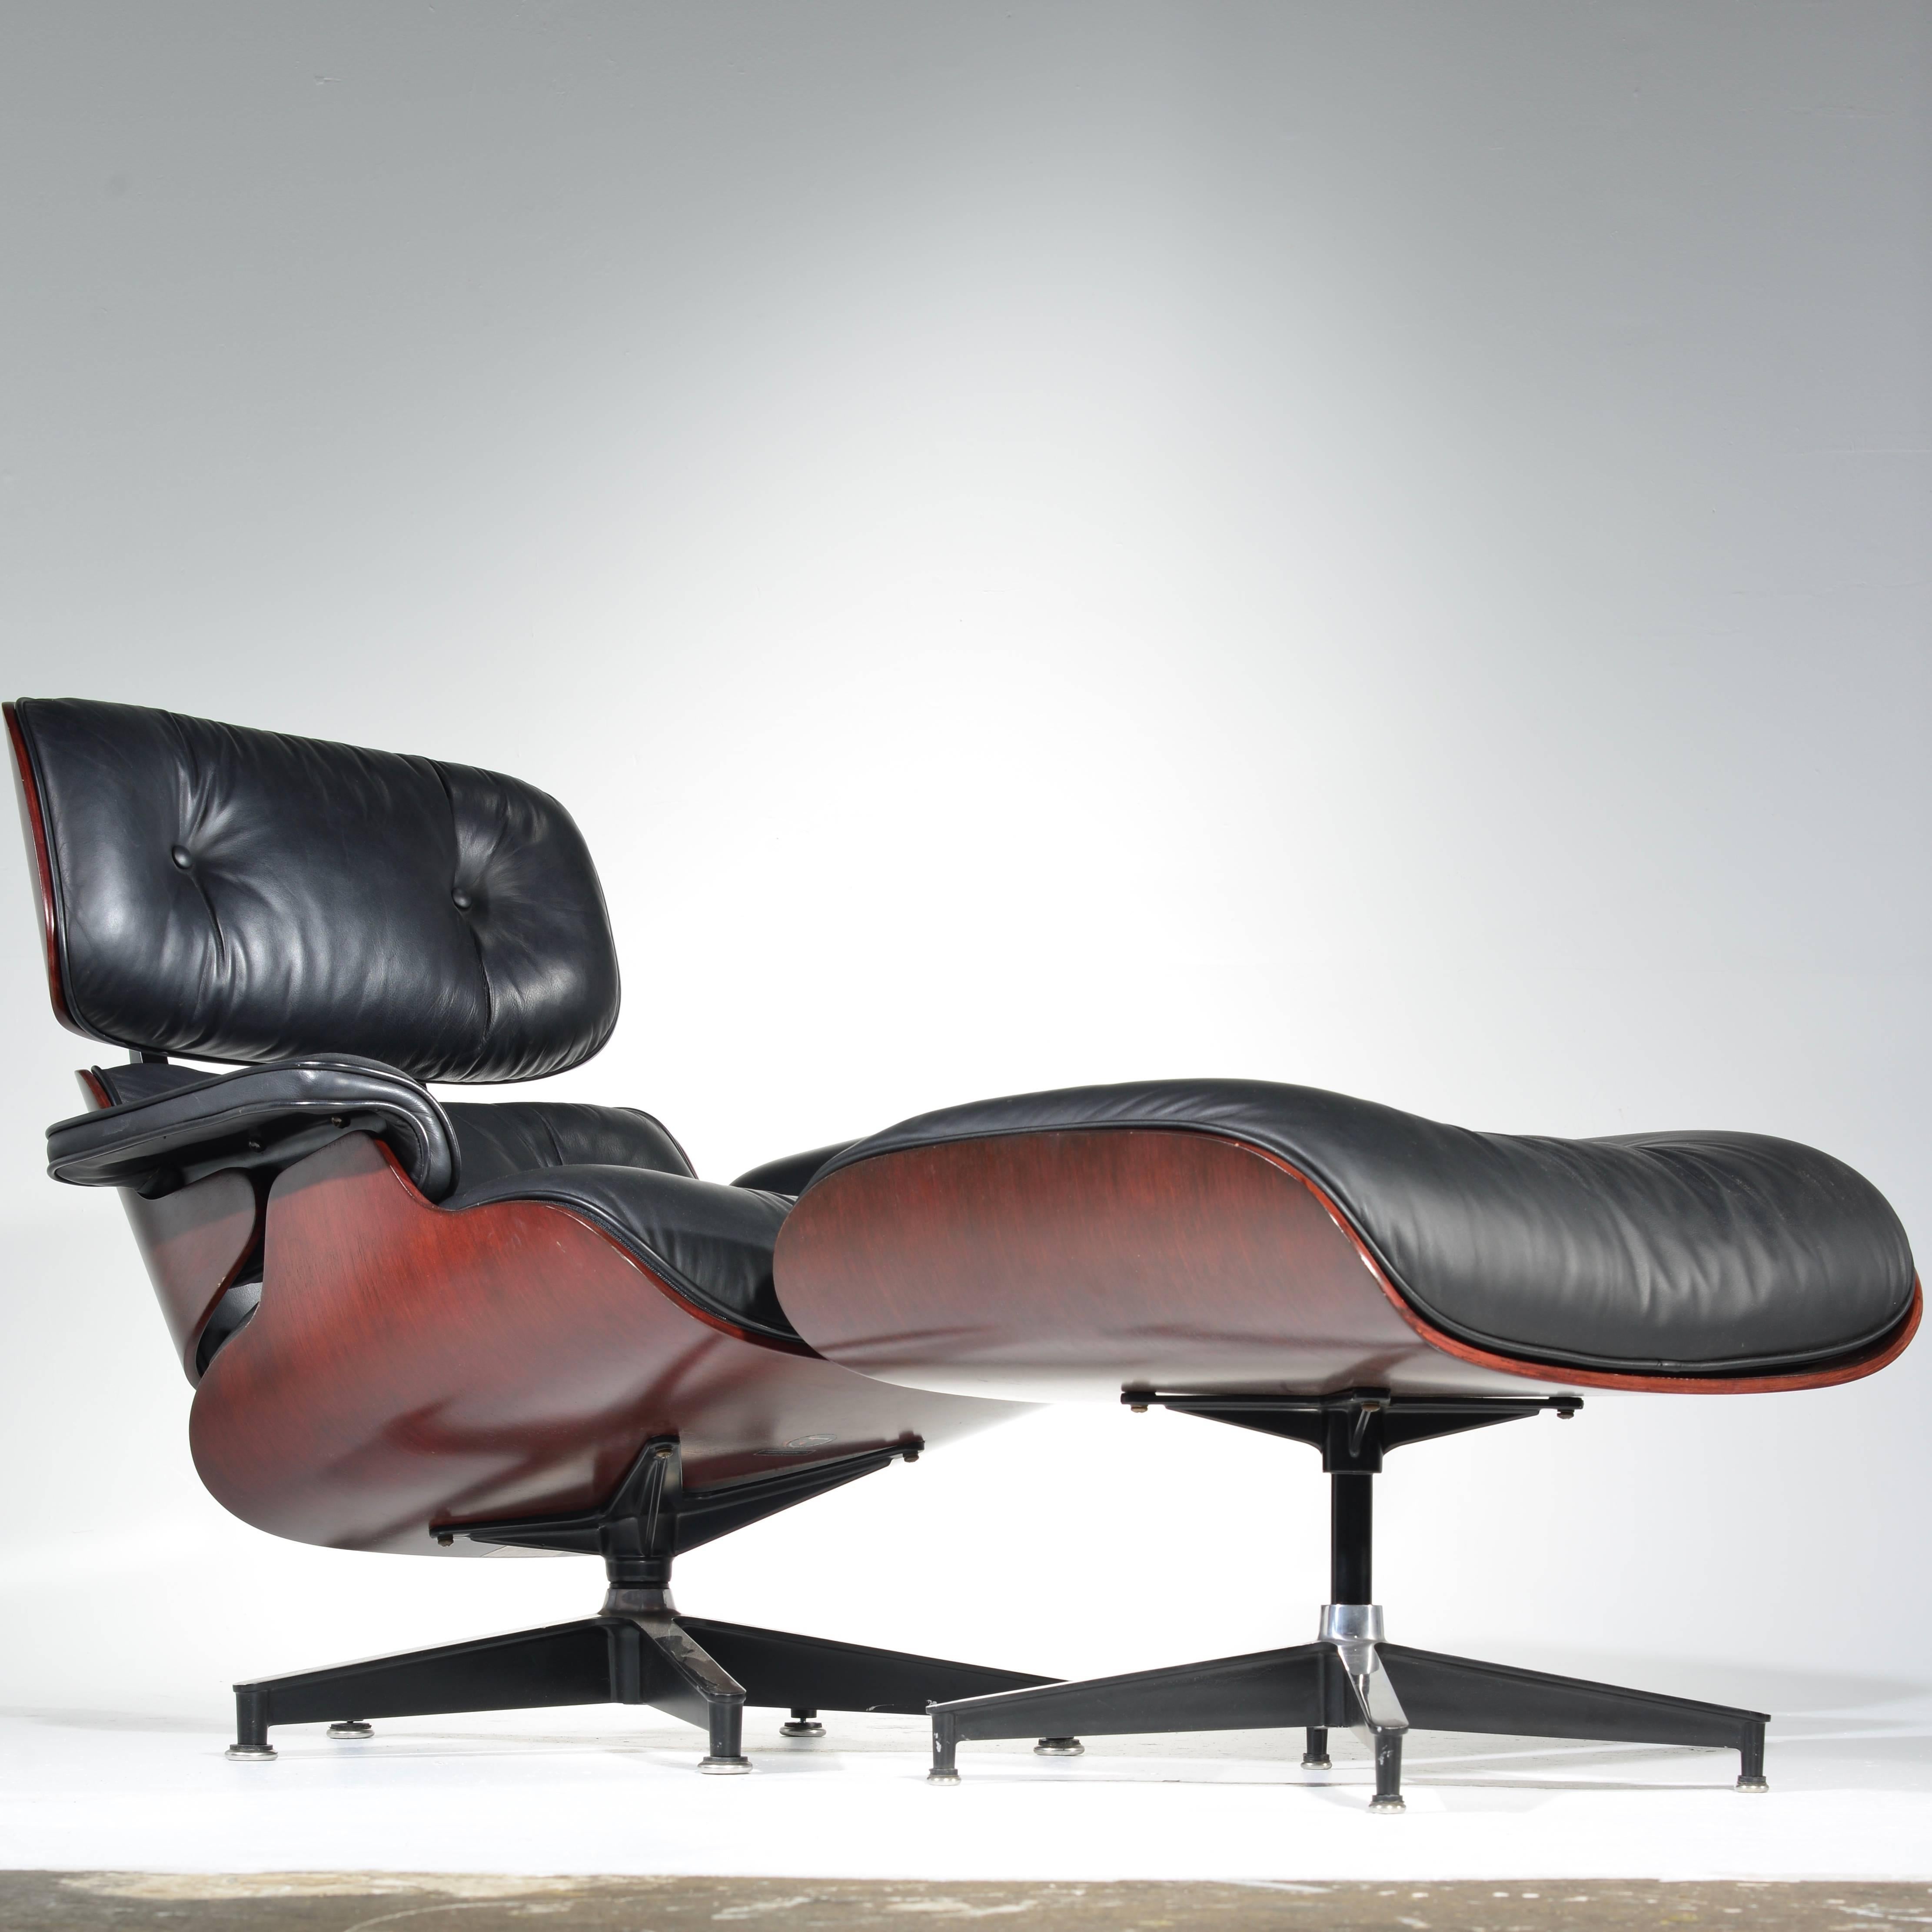 670 lounge chair and 671 ottoman designed by Charles and Ray Eames for Herman Miller. This iconic piece features a cherry shell and original black leather upholstery.